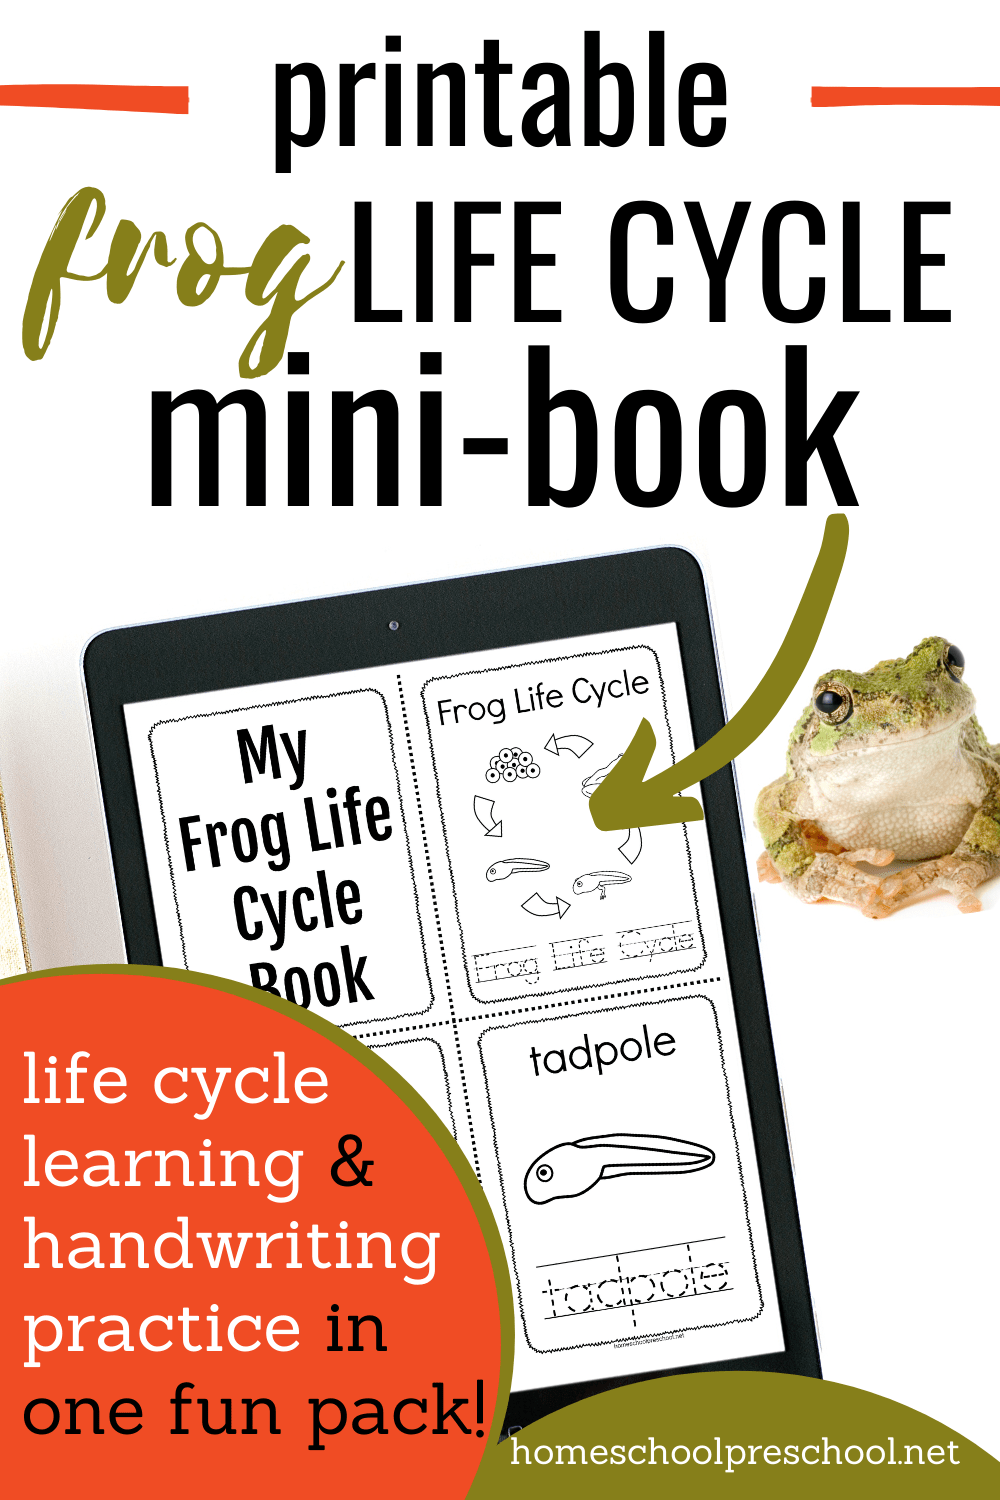 frog-life-cycle-book-3 Frog Books for Toddlers